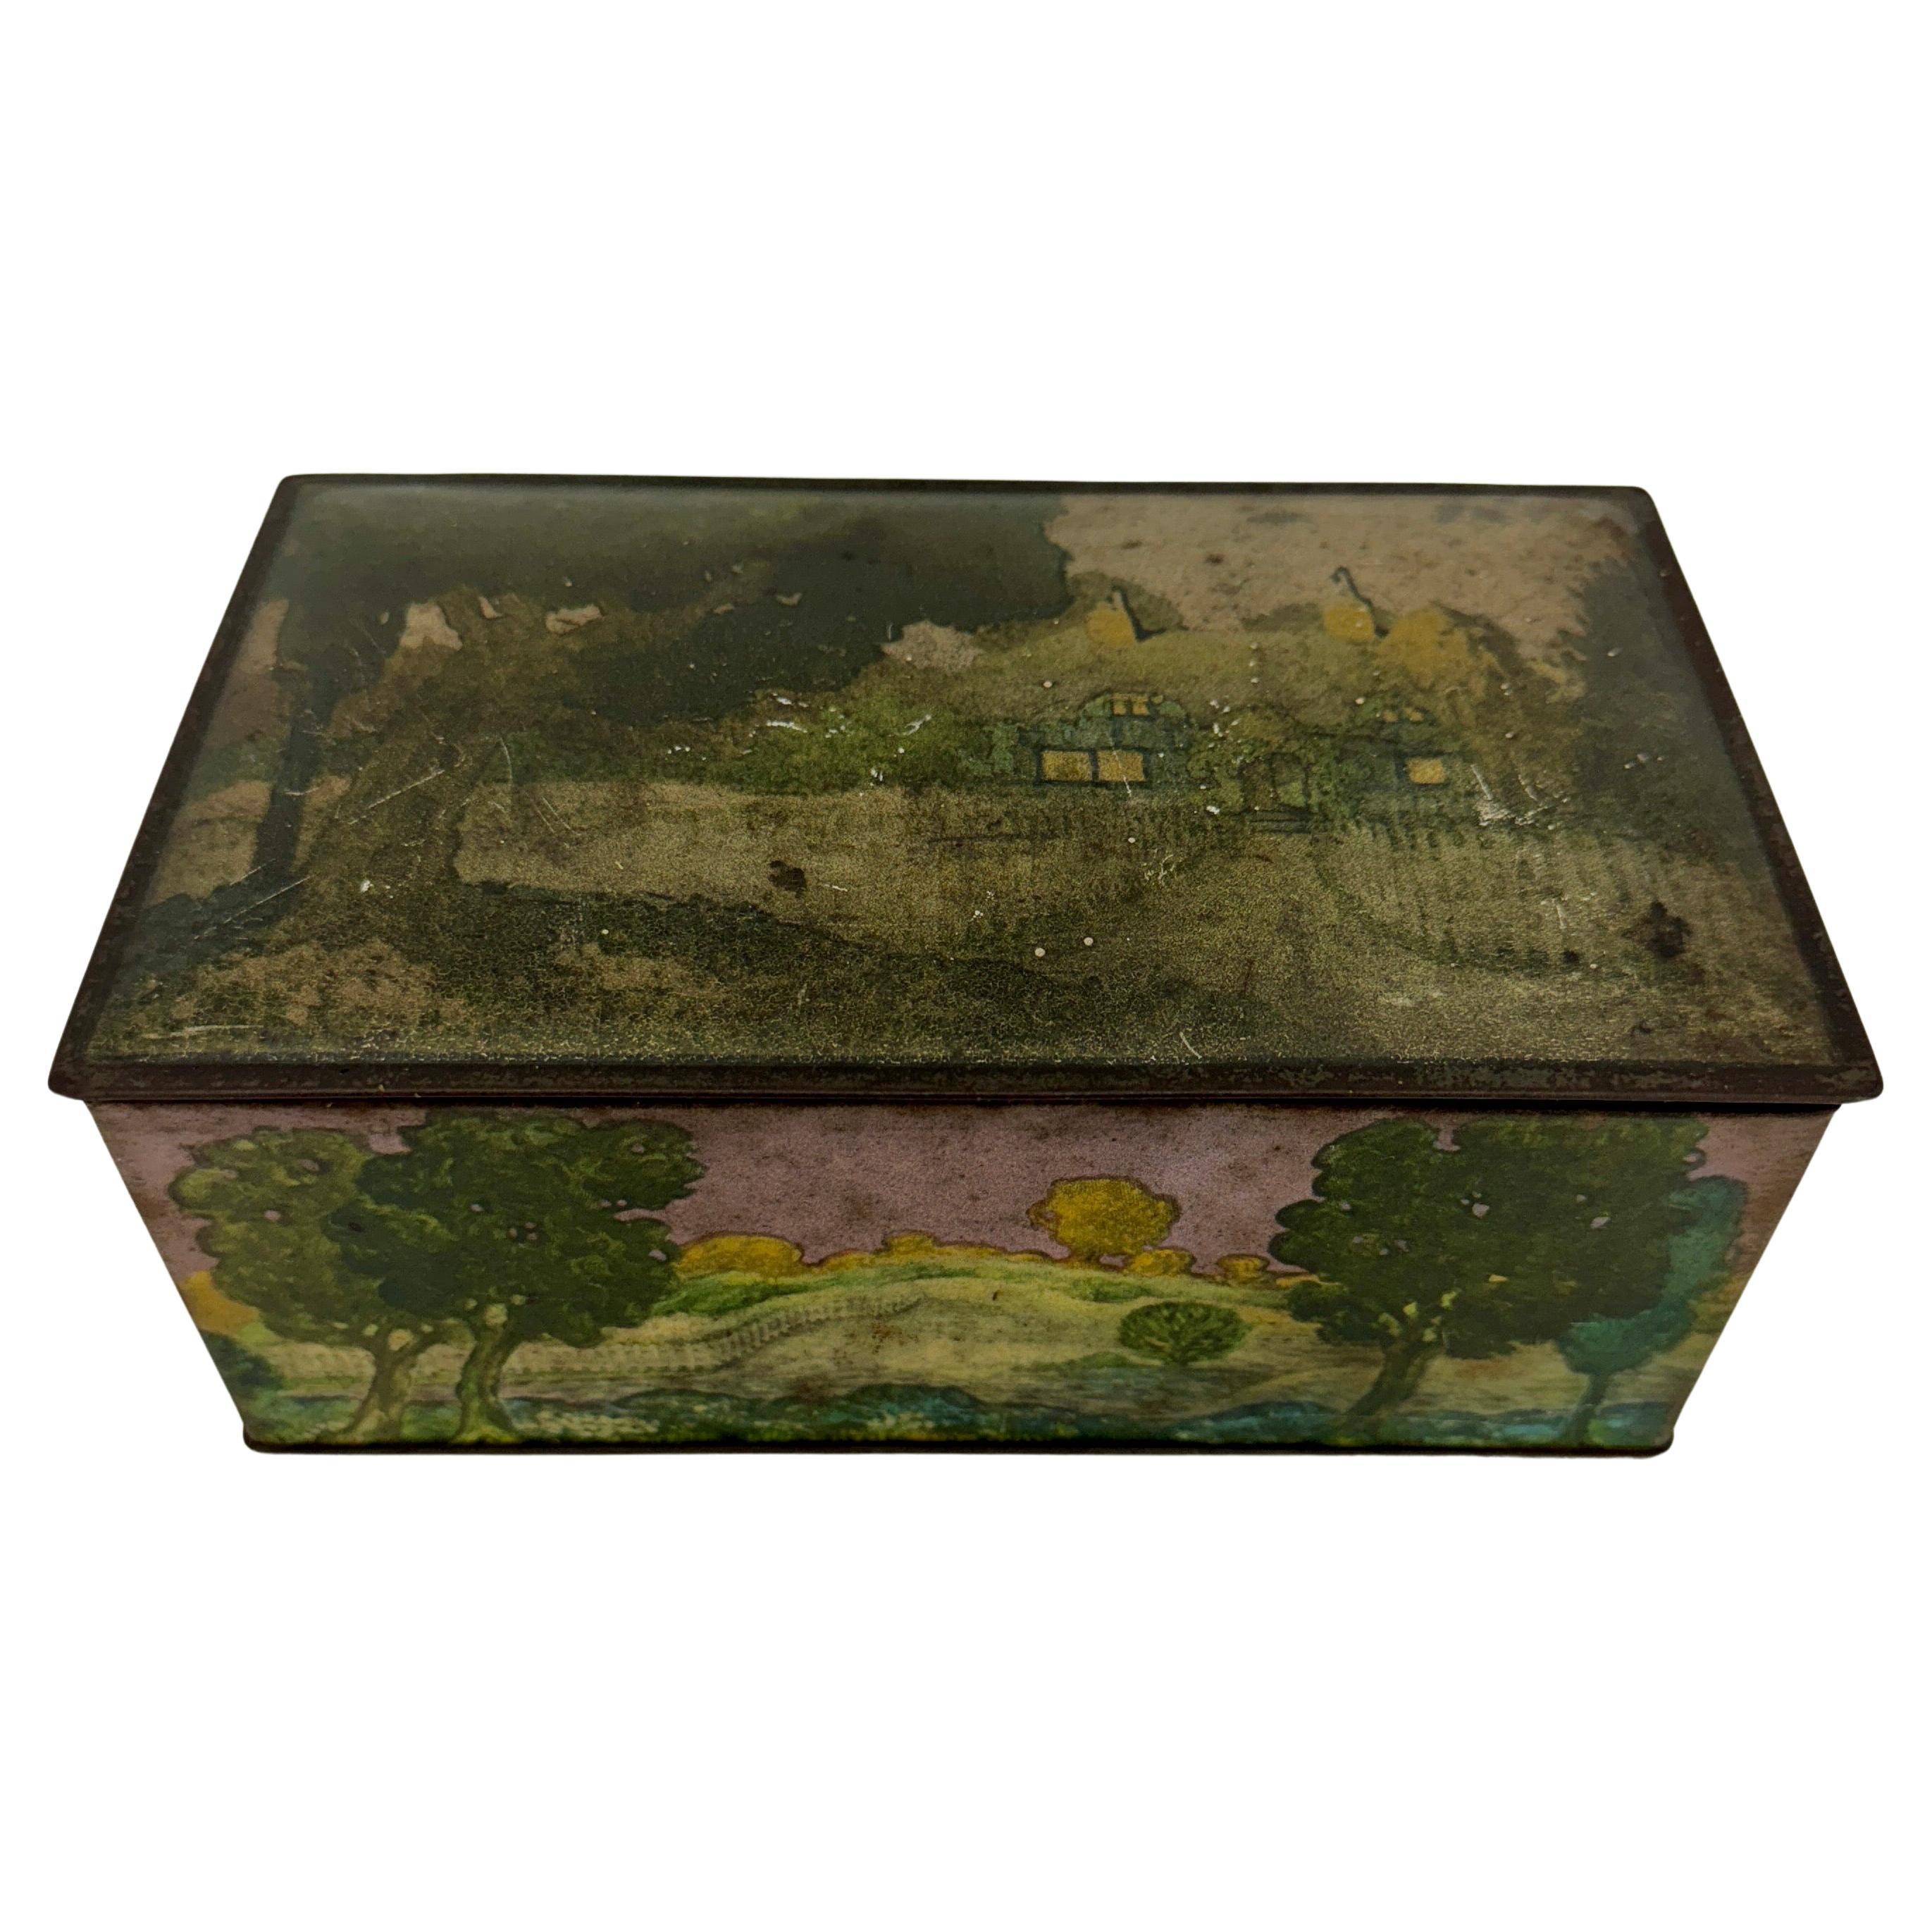 Hand-Painted Painted Tin Rectangular Box with Landscape from Canco